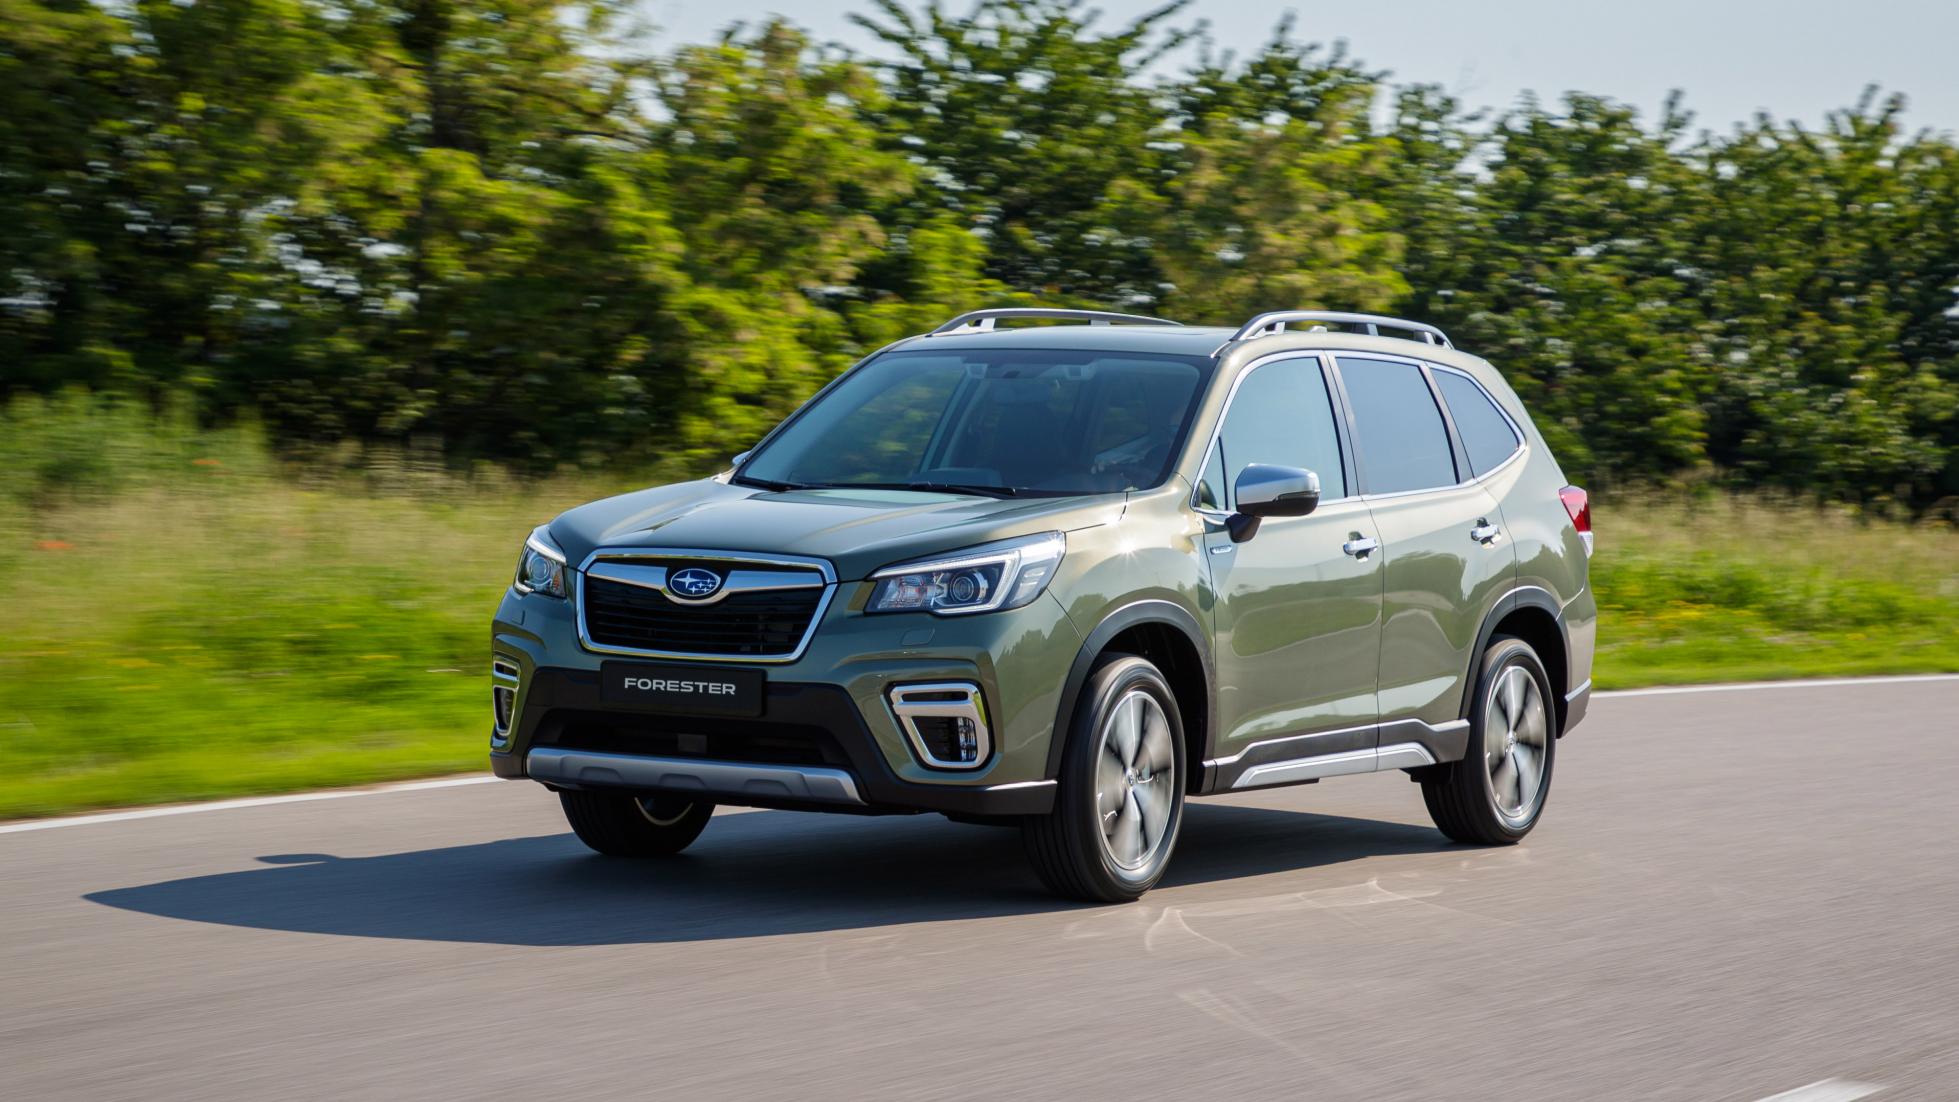 TopGear The Subaru Forester eBoxer has one mile (approx